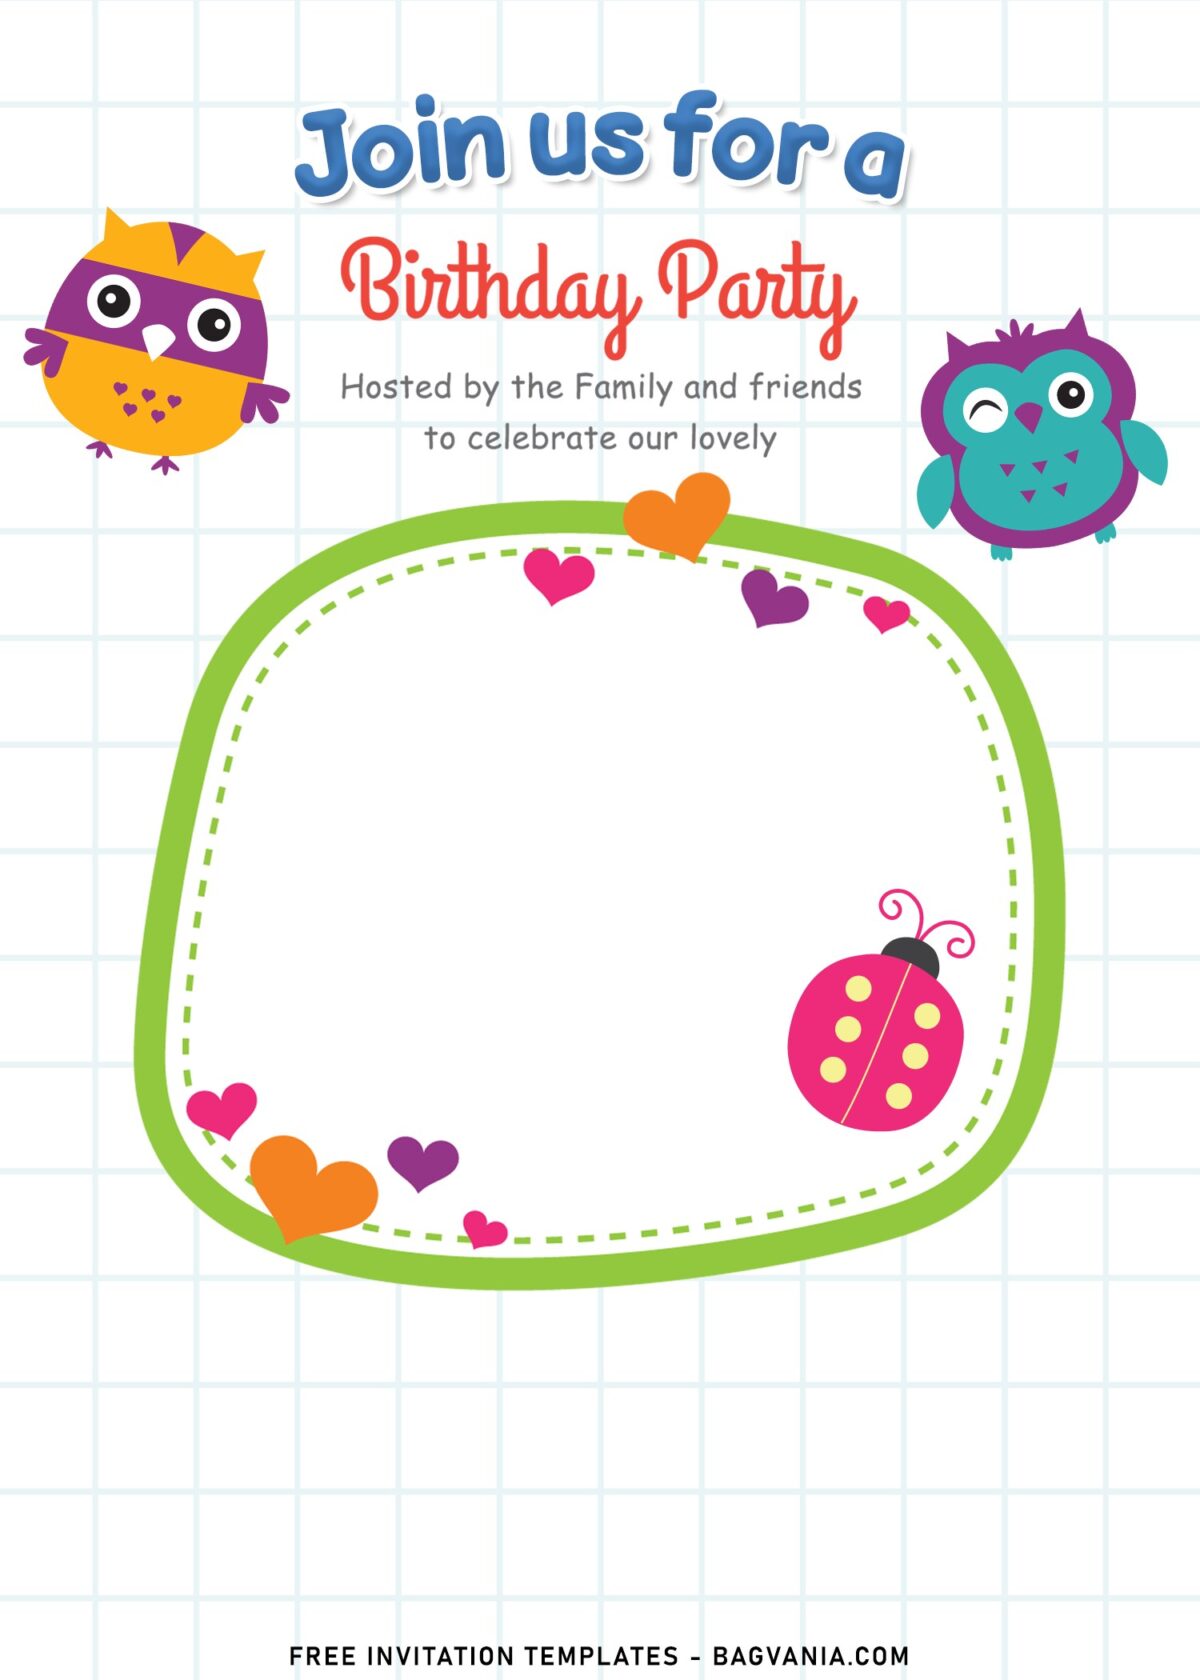 11+ Cute Owl Birthday Invitation Templates For Your Little Ones' Birthday with cute lady bug